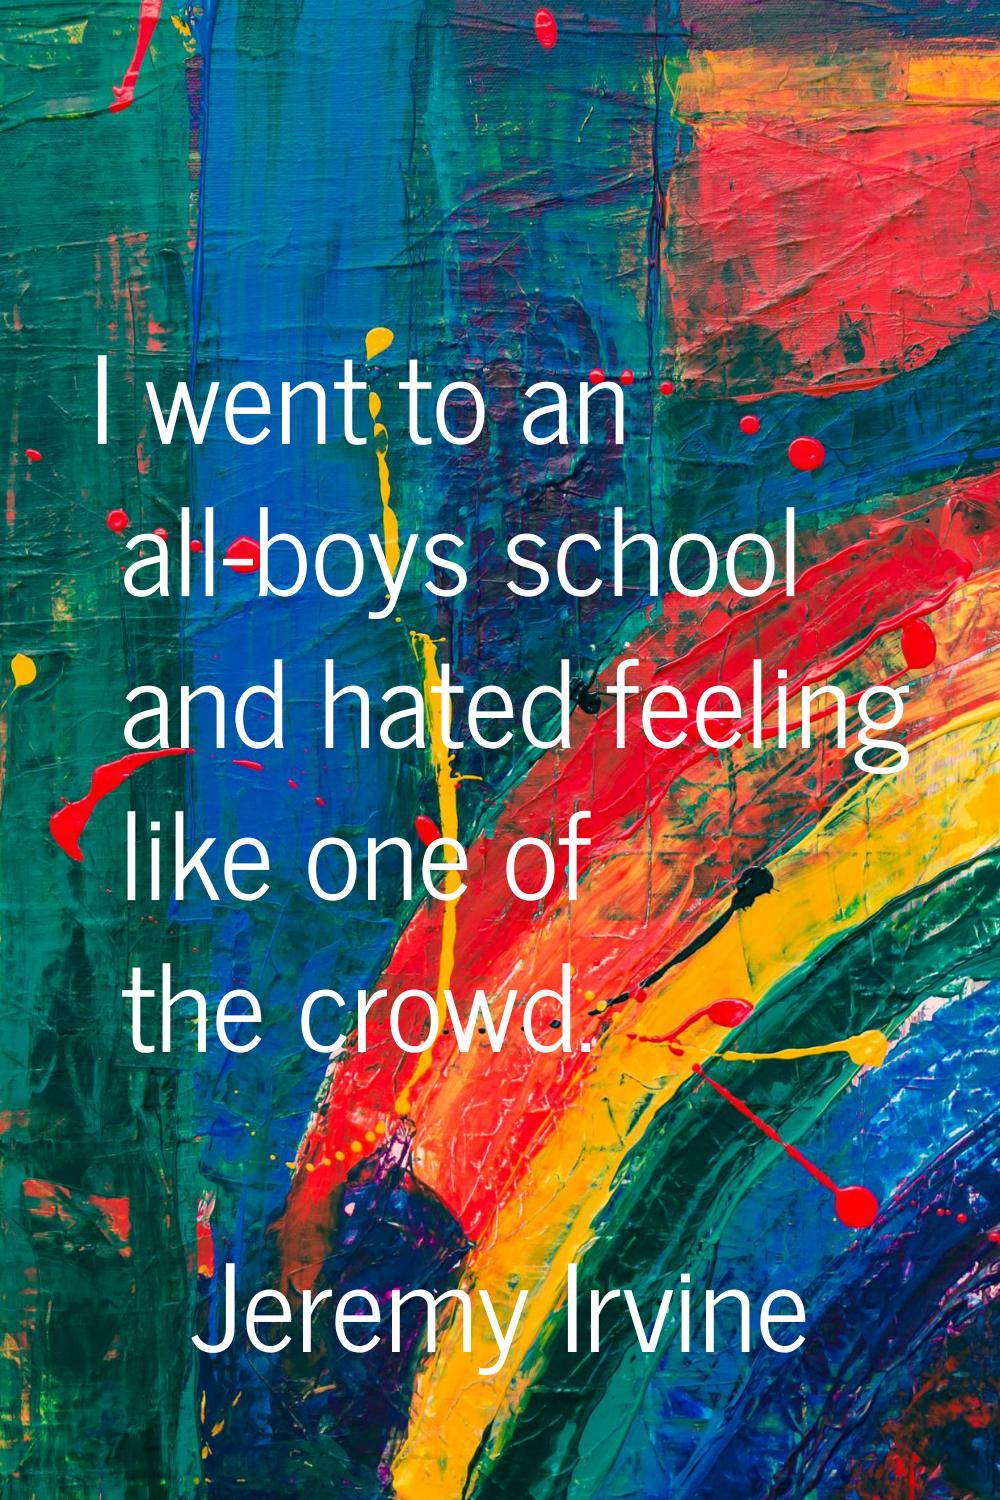 I went to an all-boys school and hated feeling like one of the crowd.